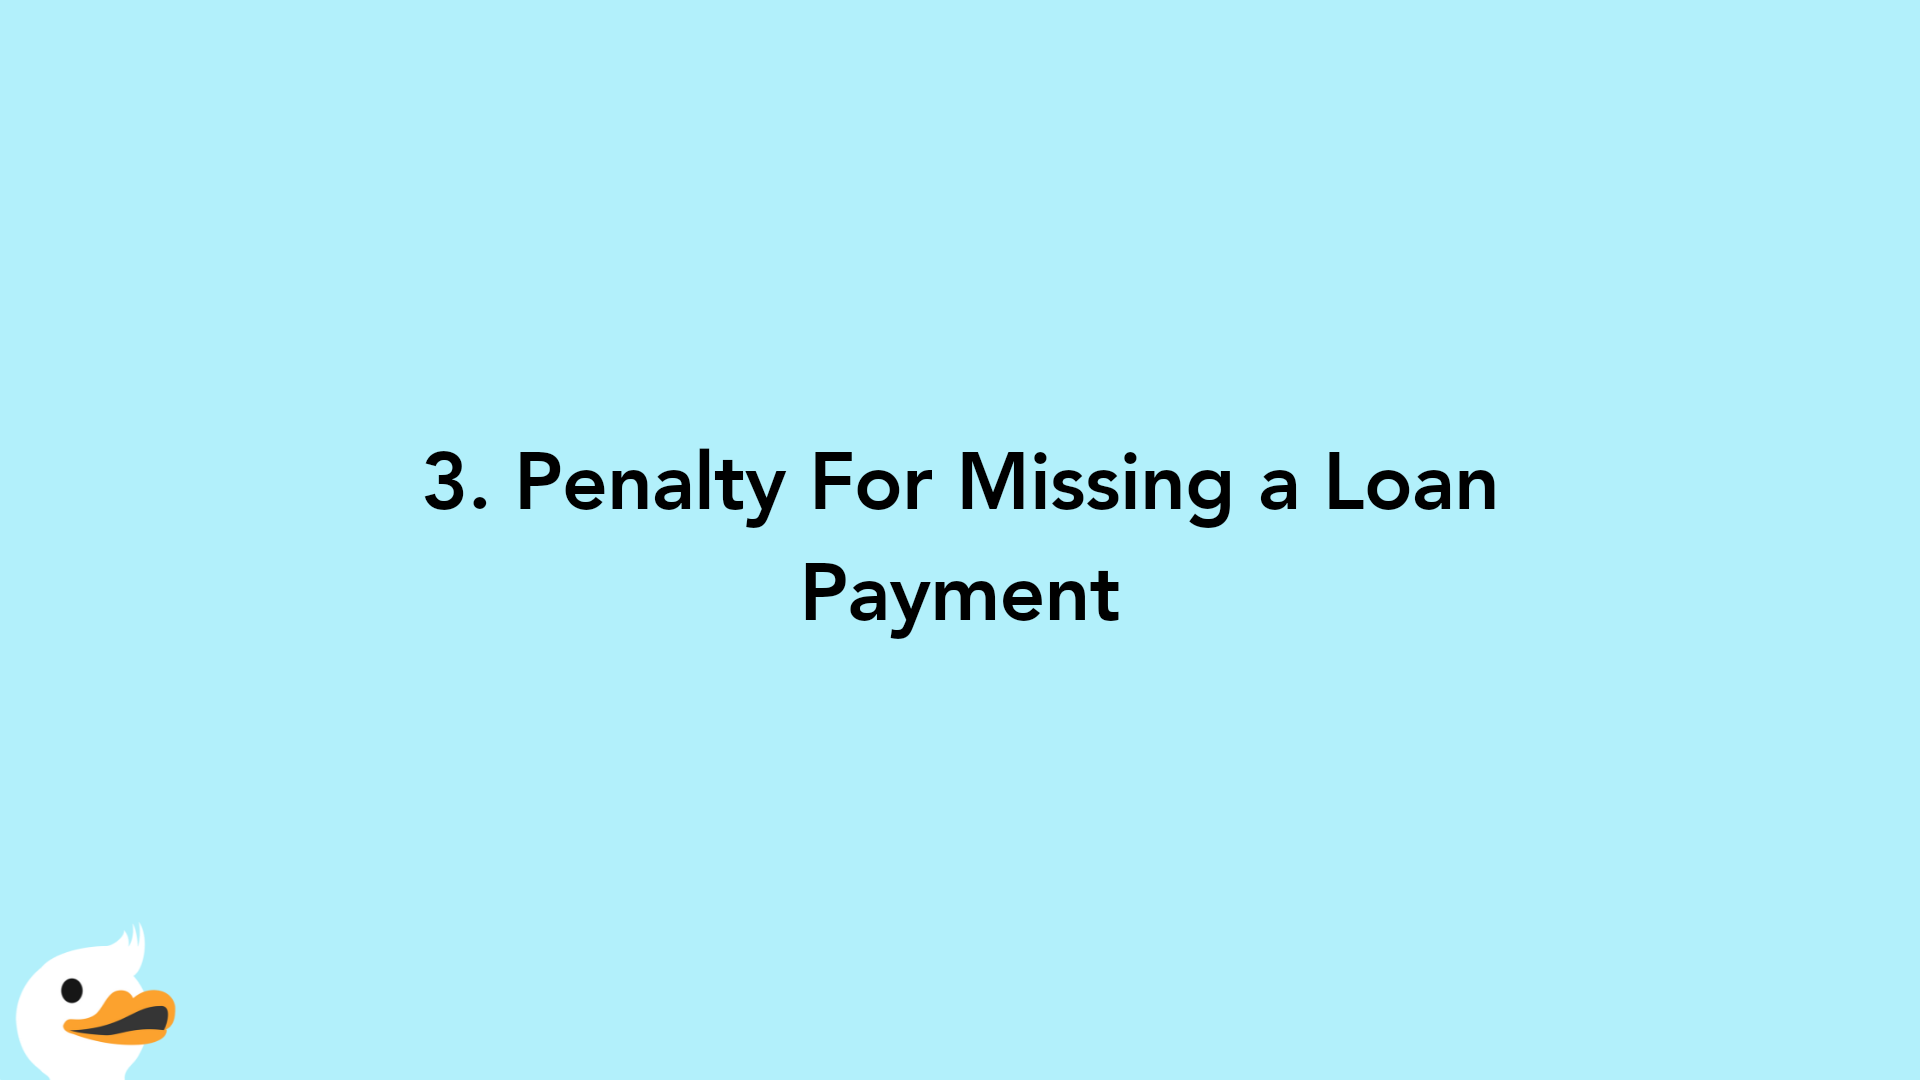 3. Penalty For Missing a Loan Payment